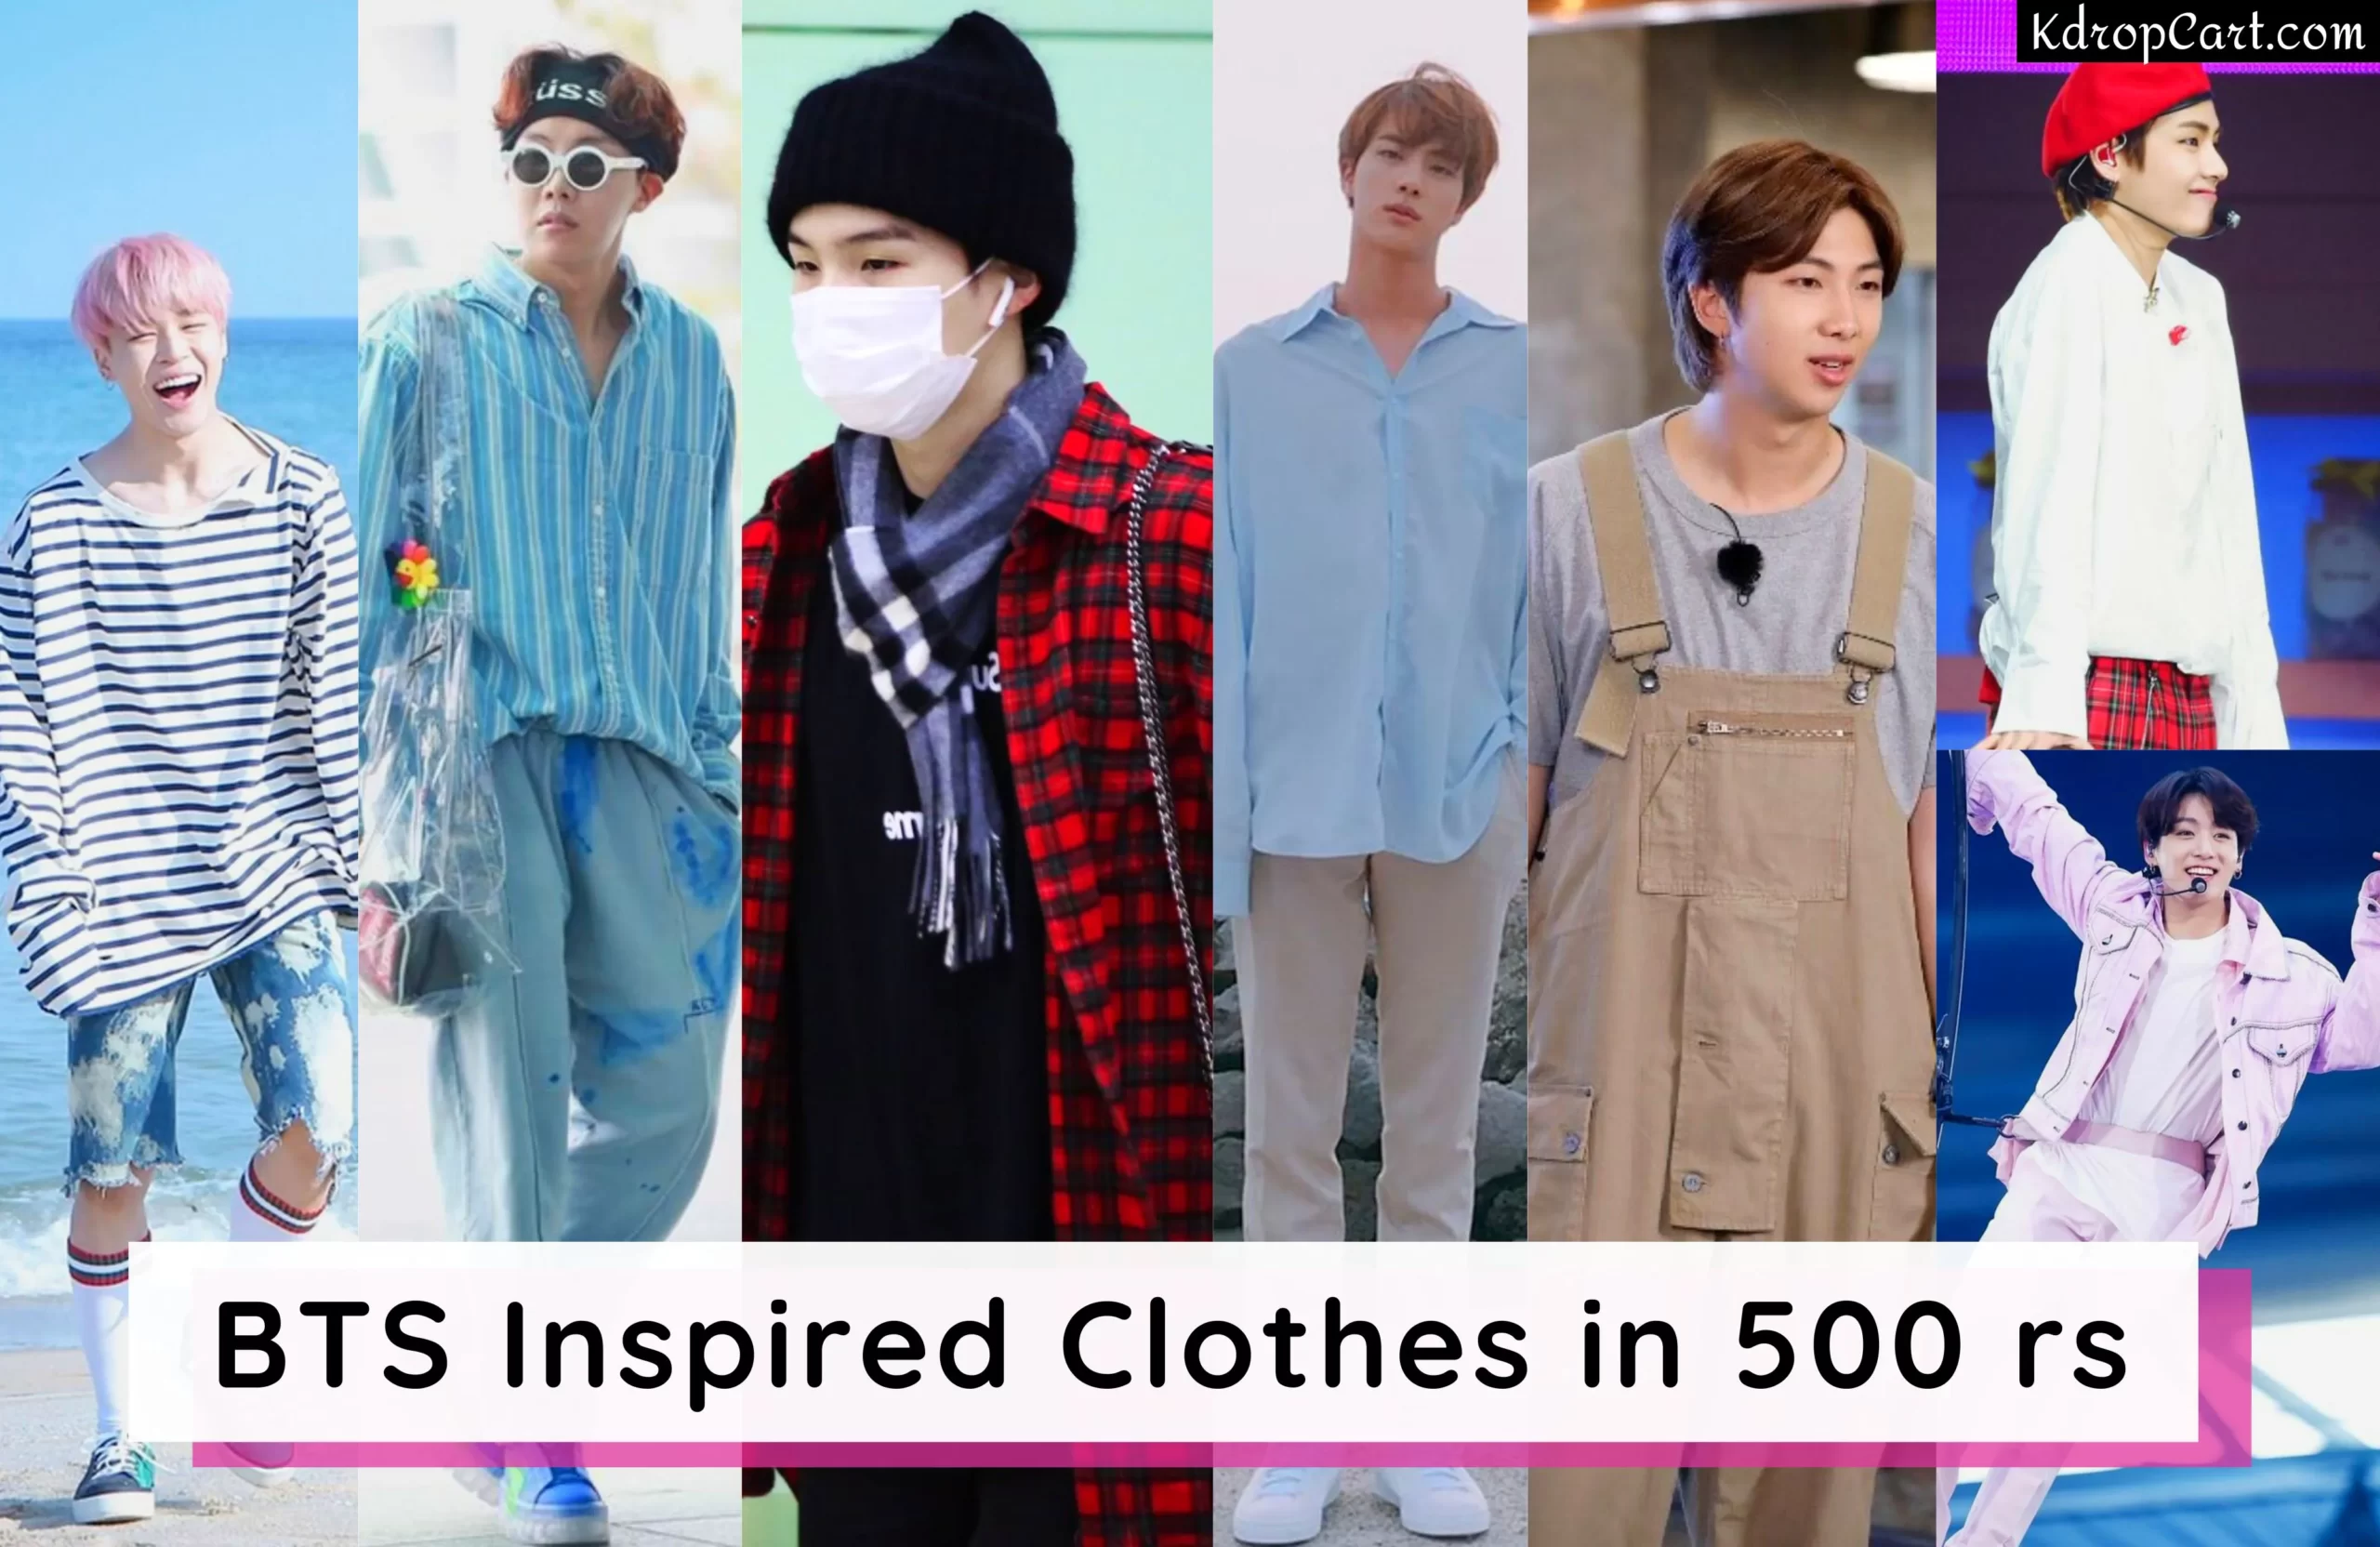 9 Easy And Affordable Ways To Dress Like BTS's V - Koreaboo